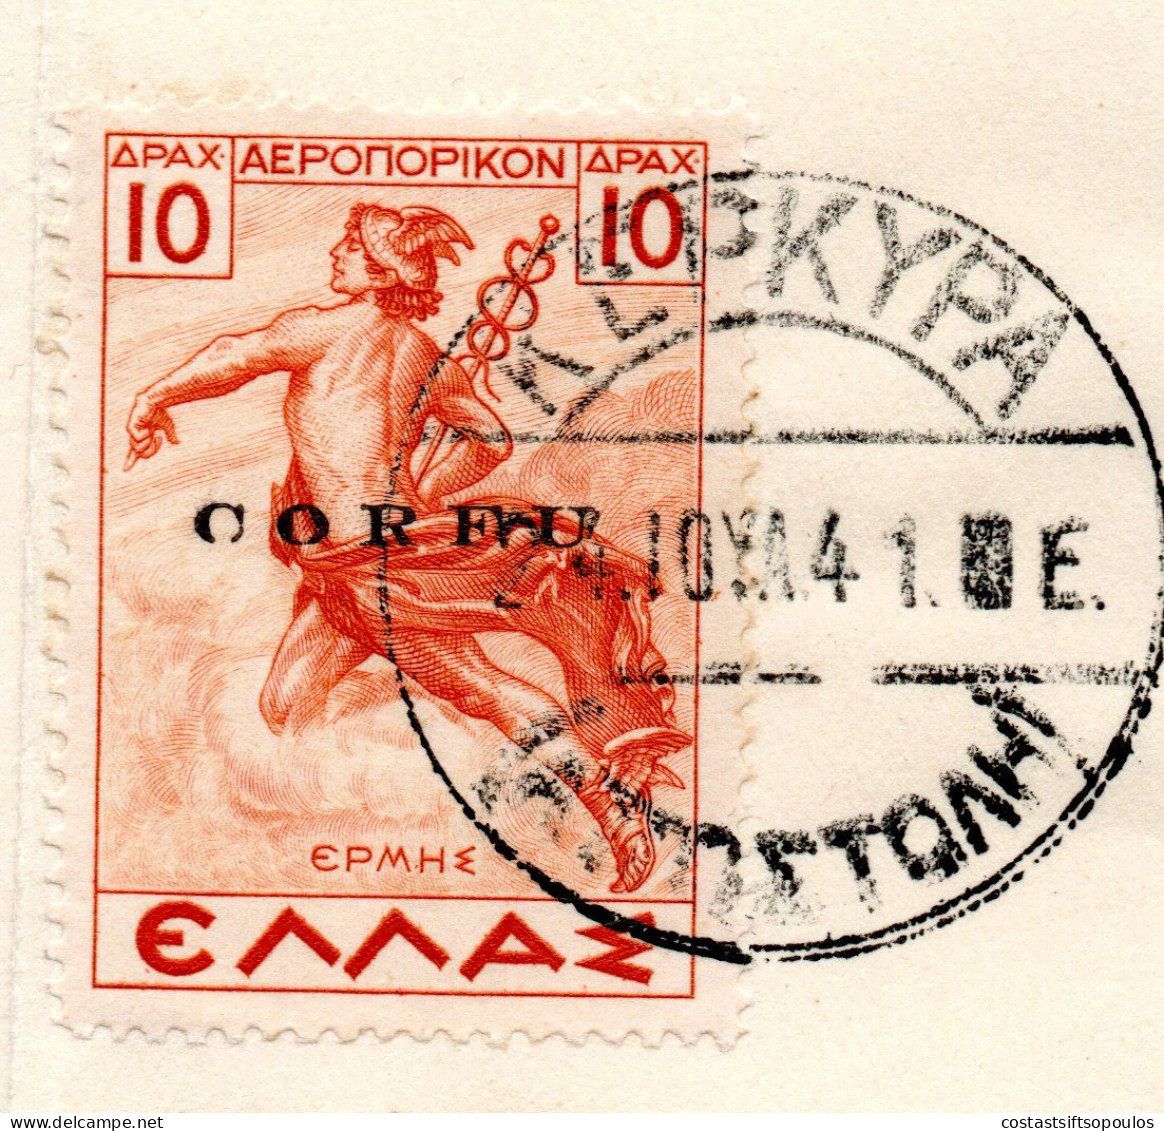 2643..GREECE,ITALY,IONIAN,CORFU,1941 AIRPOST HELLAS 20-31(-29 100 DR.}ON PAPER, CERTIFIED 15/8/41,13 SCANS